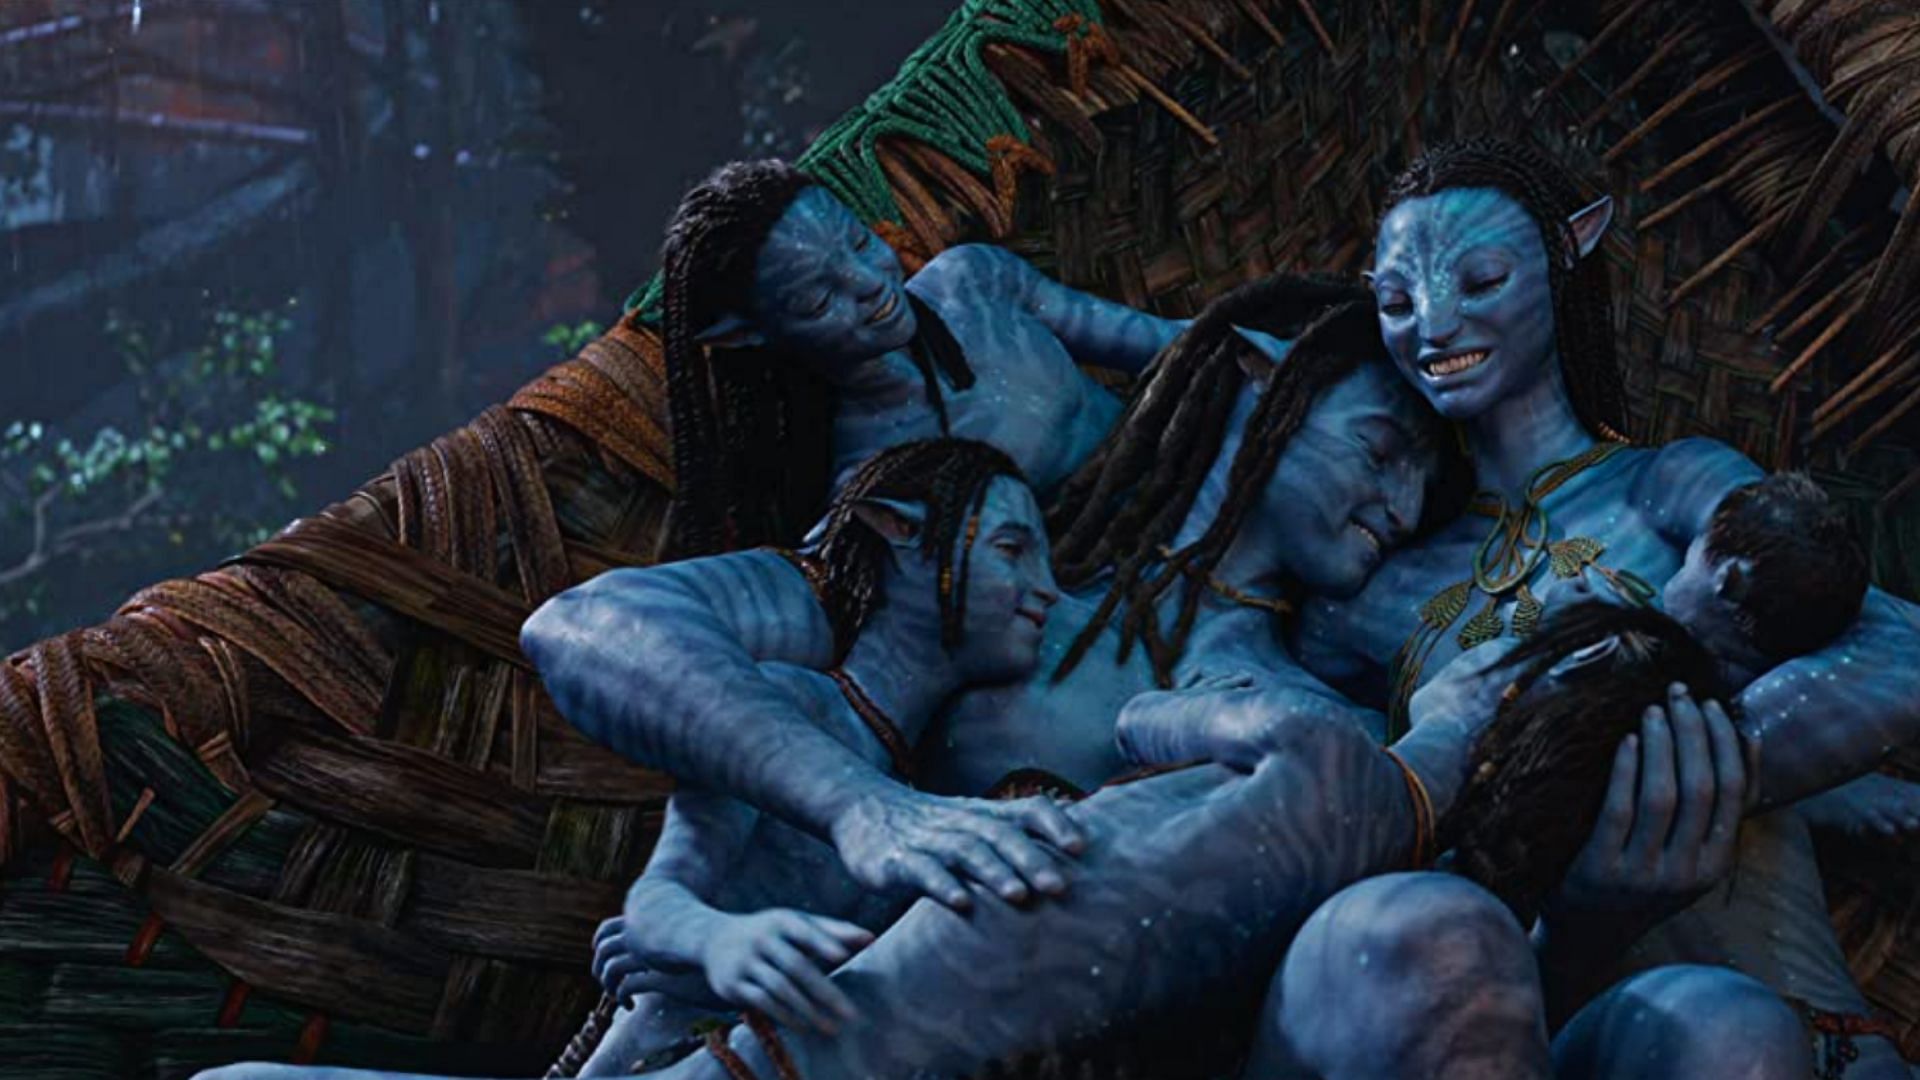 avatar: the way of water: Where to watch Avatar 2 online?